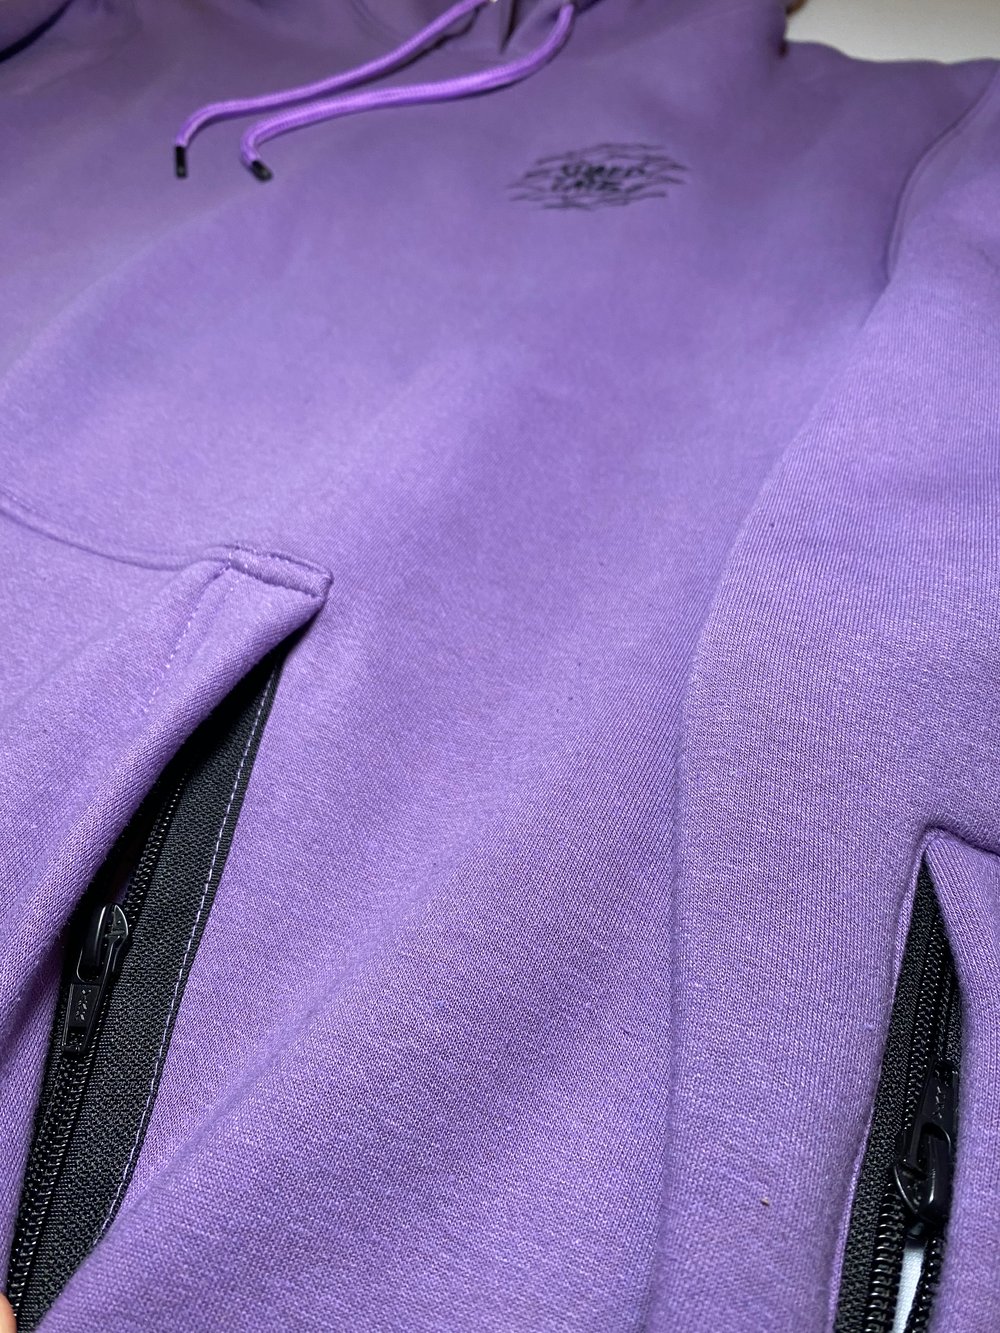 ShredCatz Collab Hoodie in Lavender 